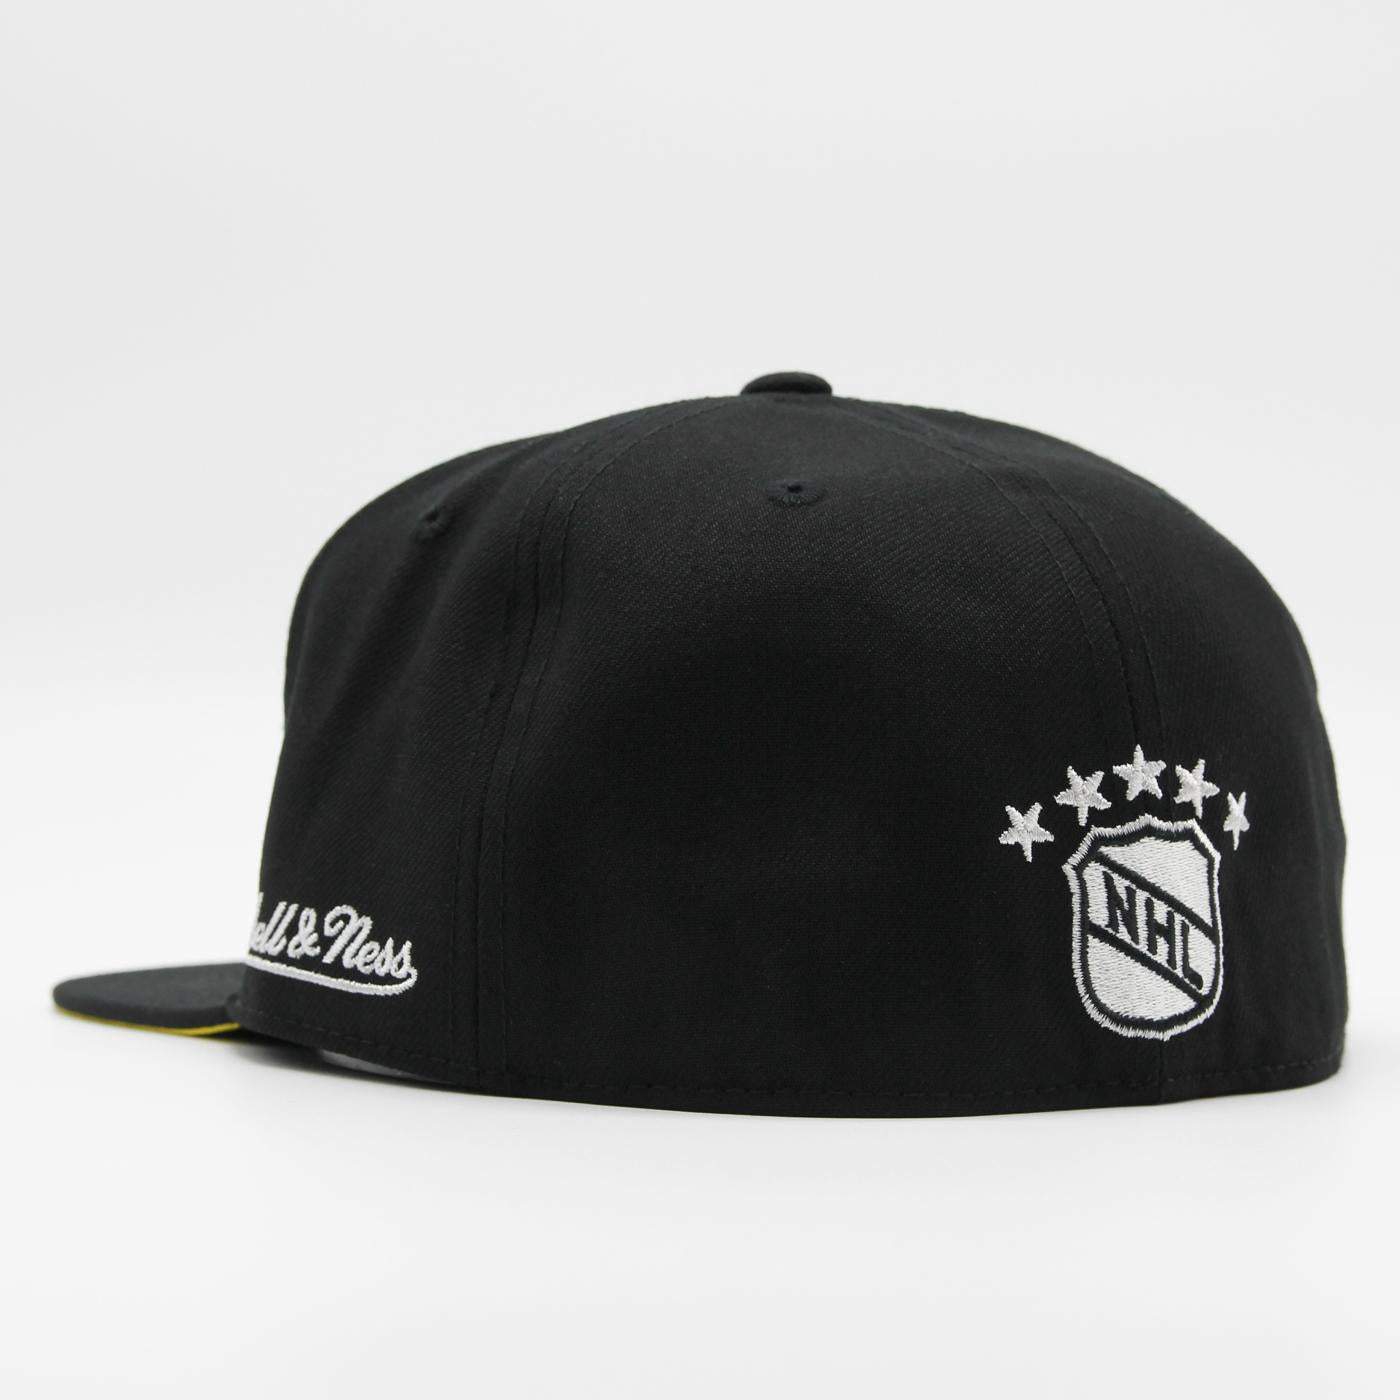 Mitchell & Ness NHL Vintage Fitted B Bruins black